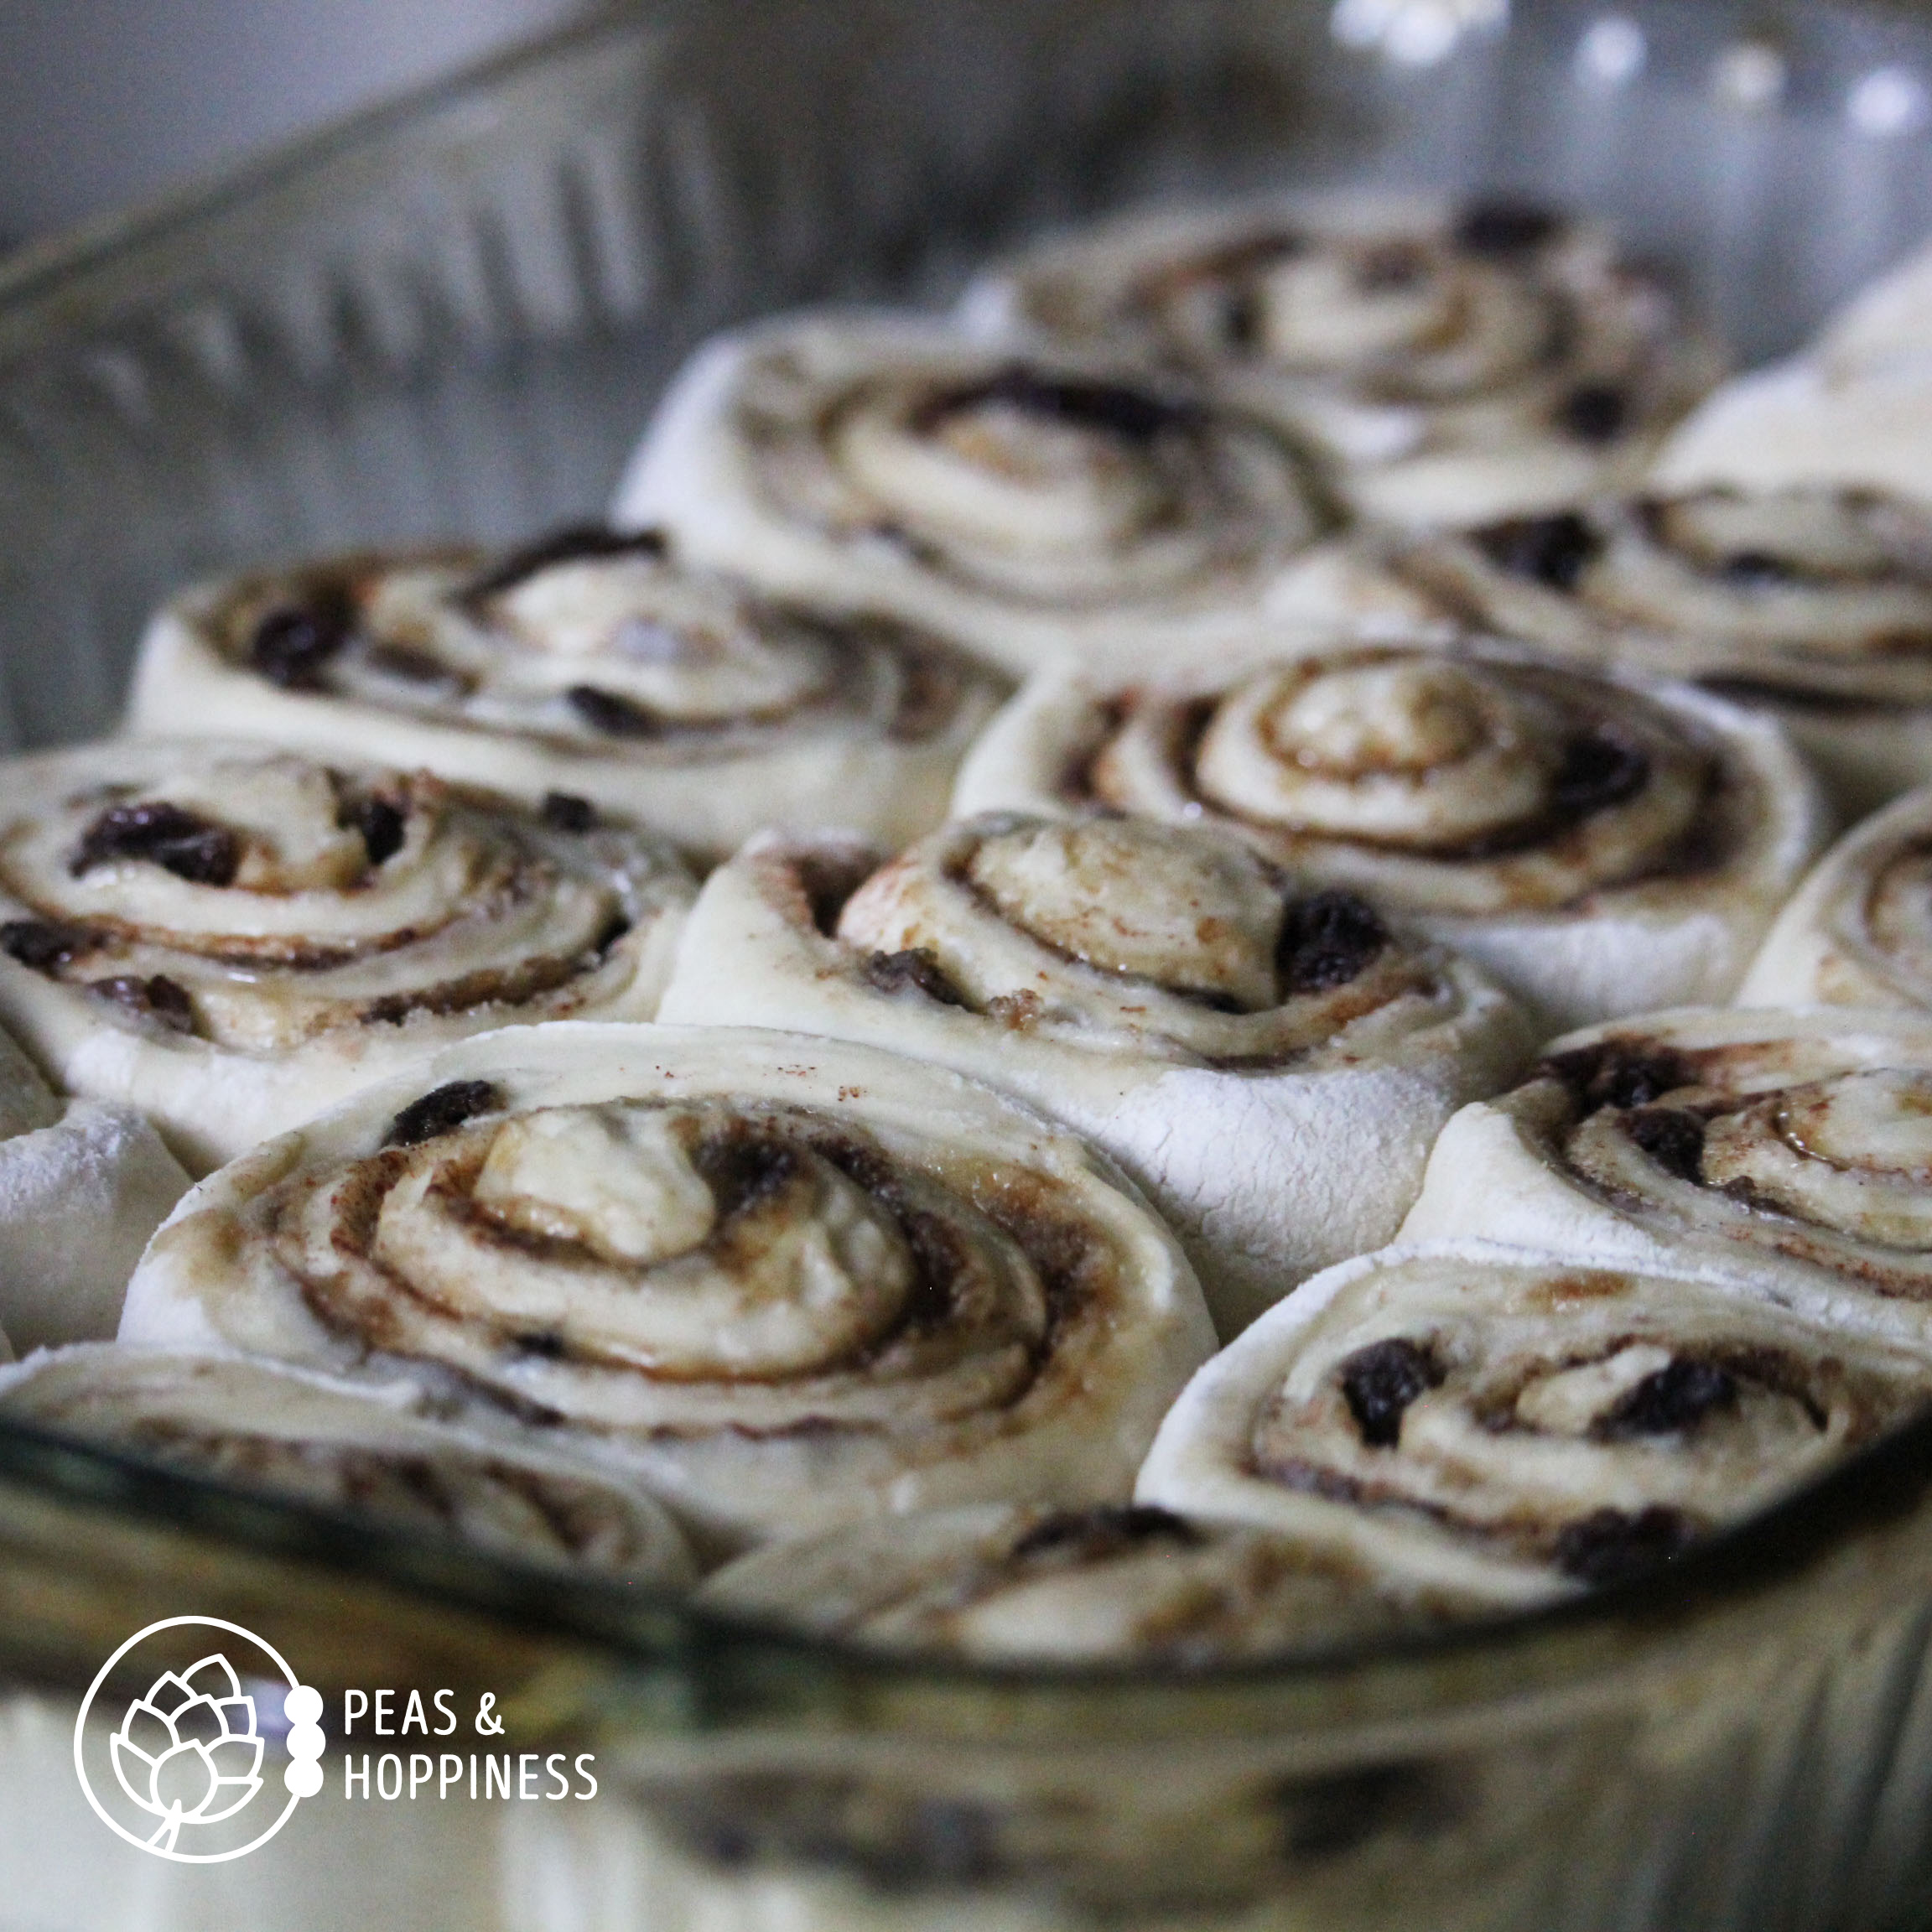 Baking Dish full of Sourdough Cinnamon Rolls Recipe from Peas and Hoppiness - Square